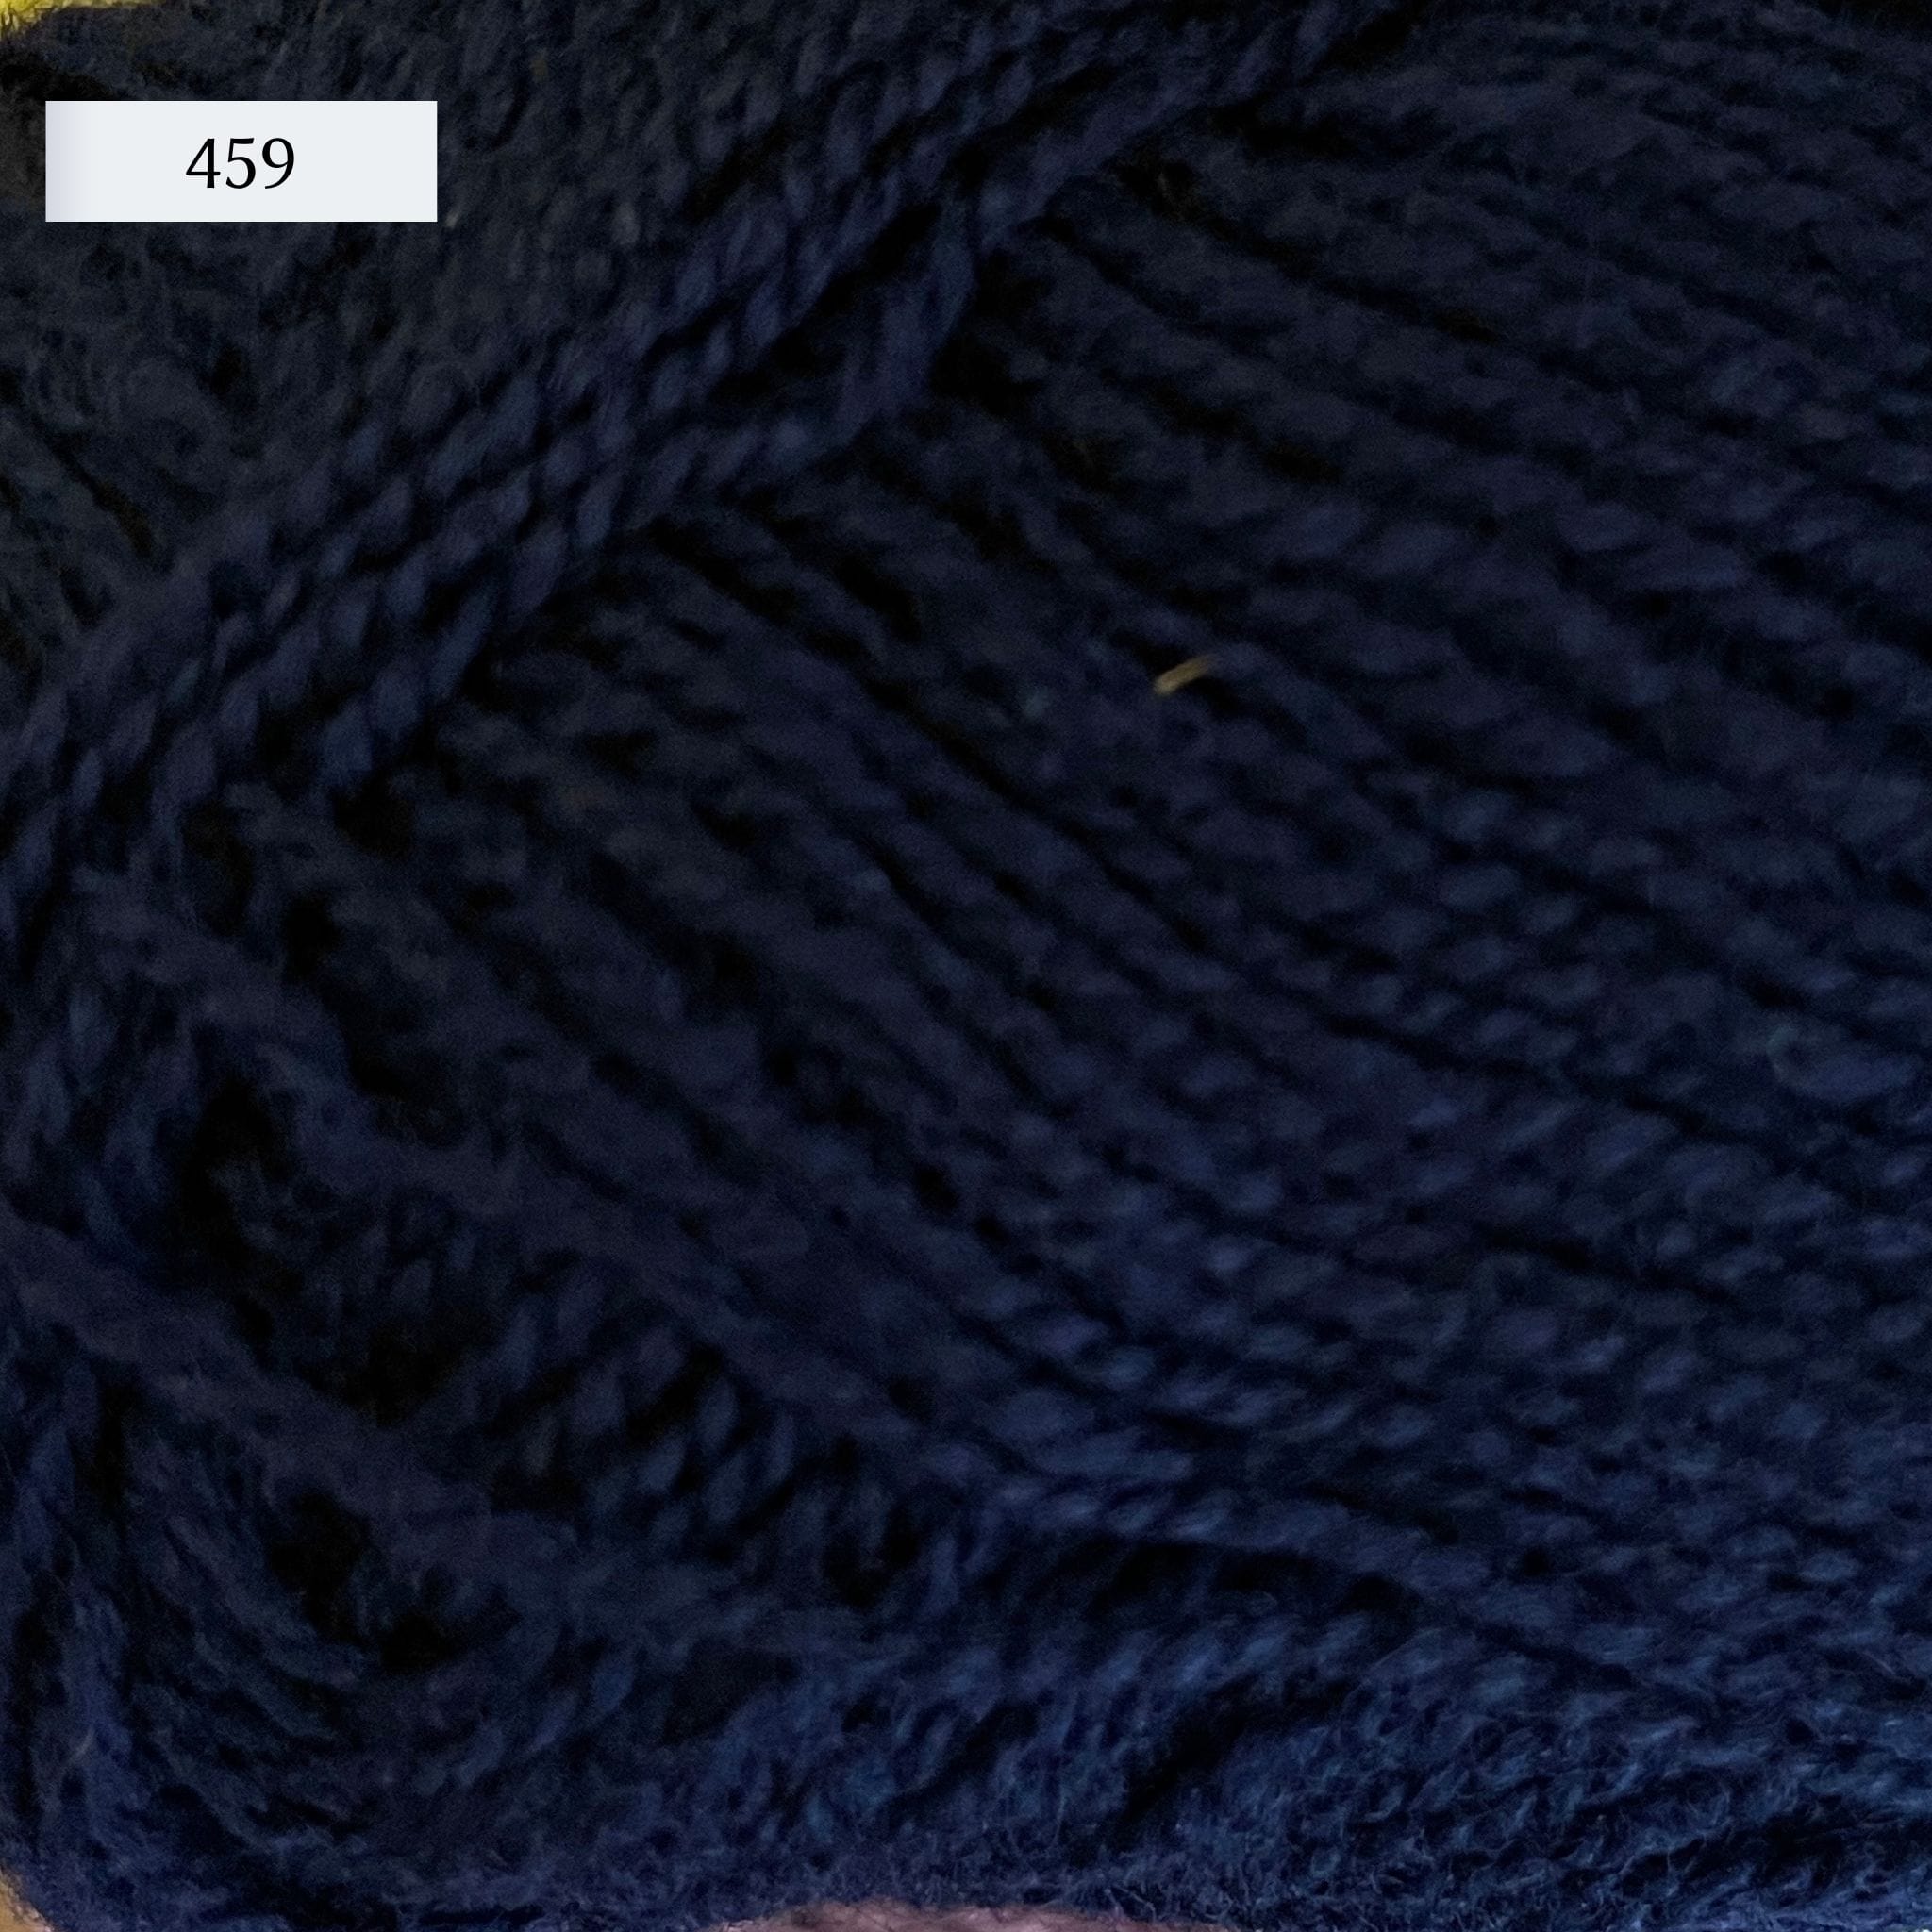 Rauma Gammelserie 2ply wool yarn, fingering weight, in color 459, navy blue